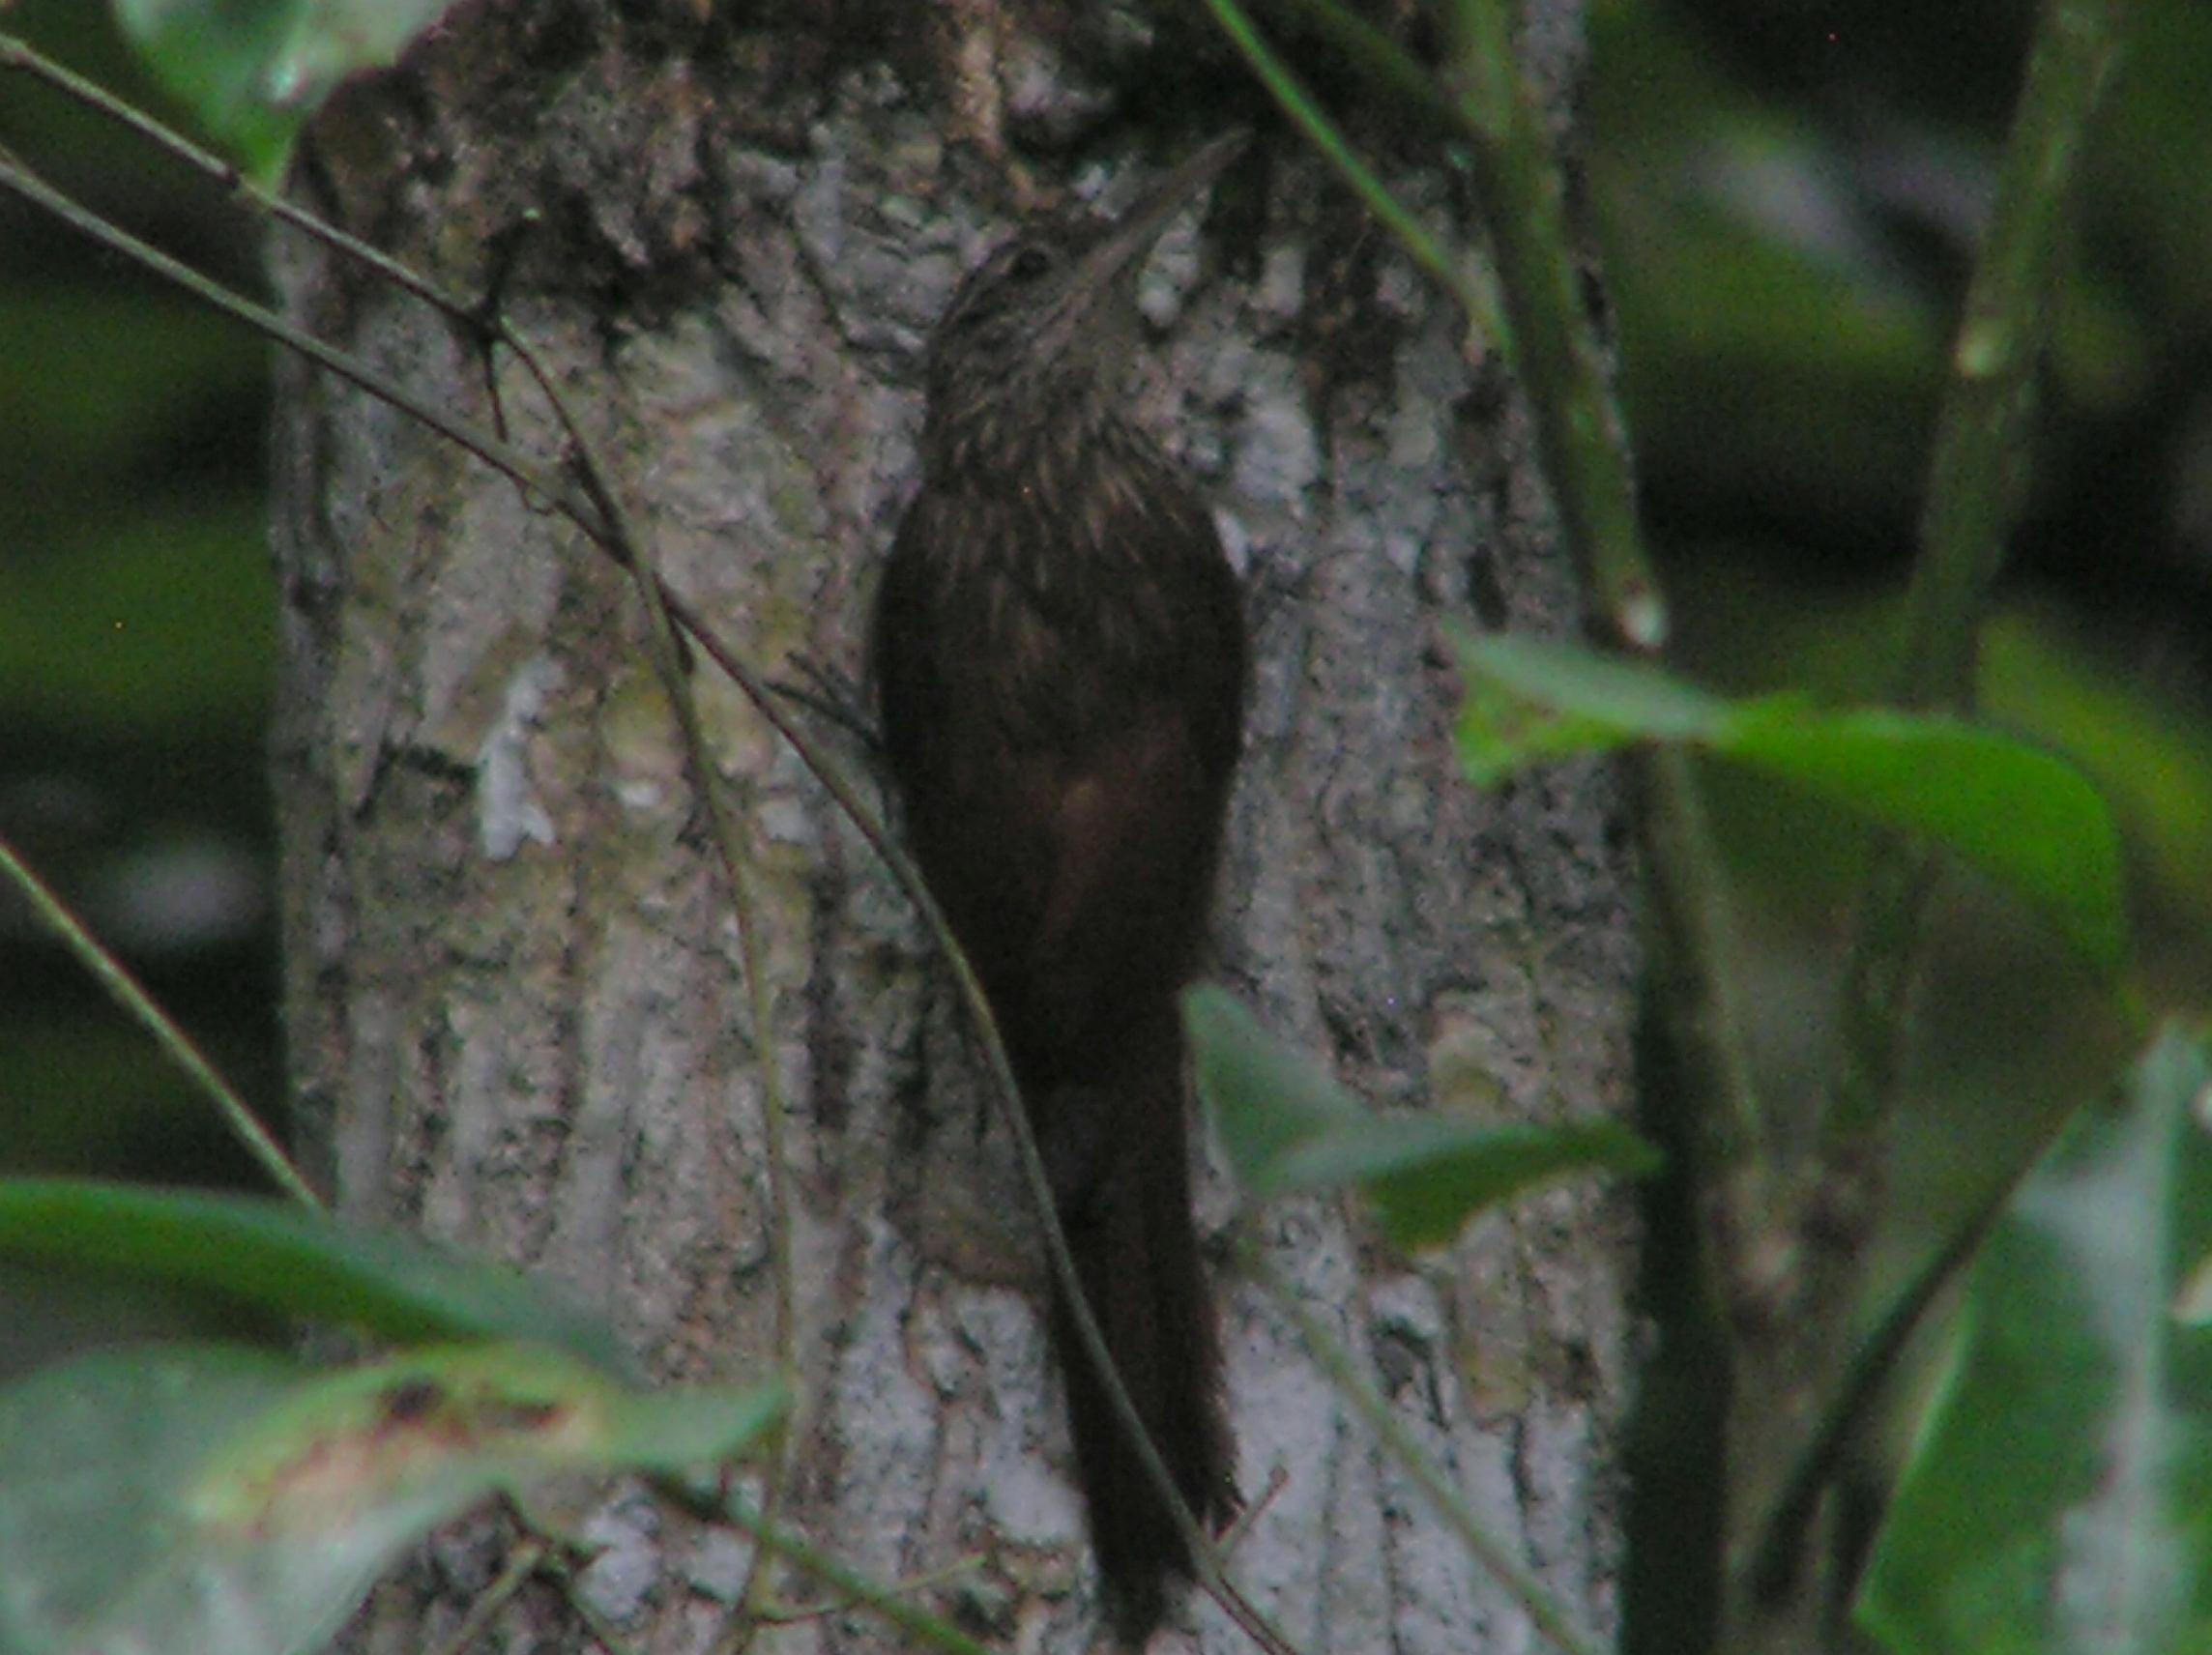 Click picture to see more Streaked-headed Woodcreeper photos.